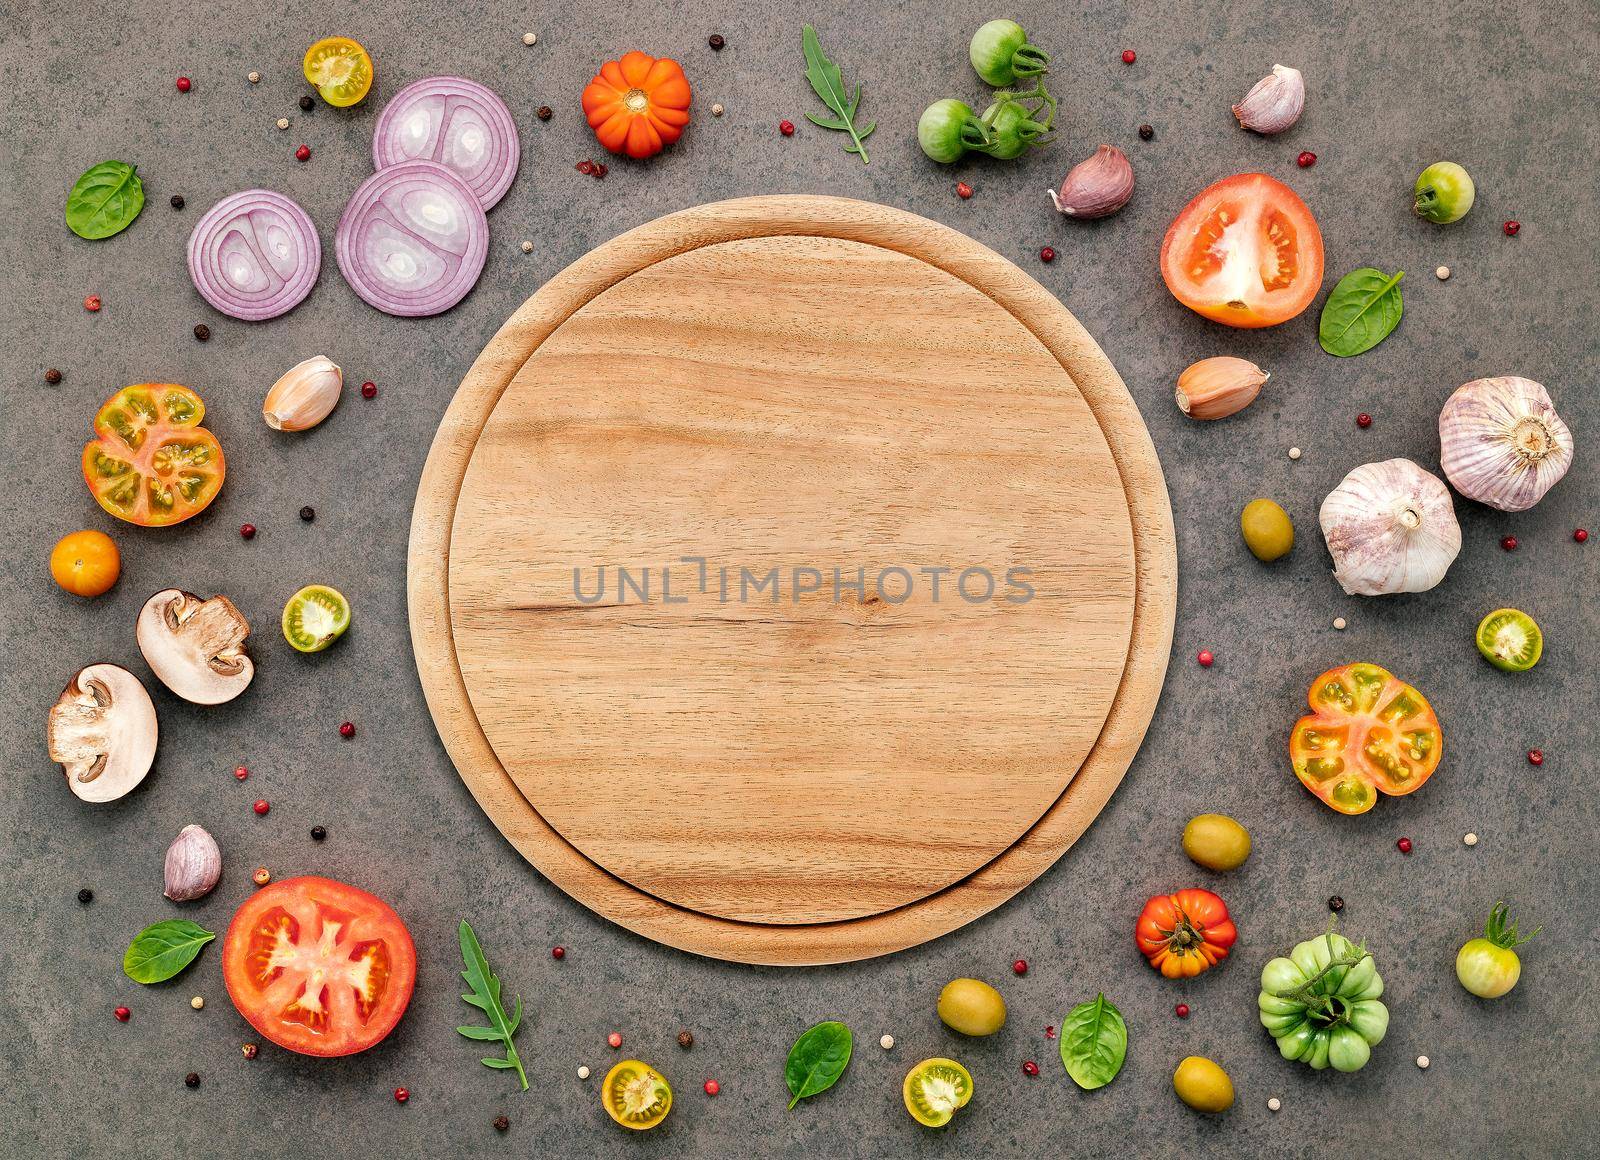 The ingredients for homemade pizza set up on dark stone background.